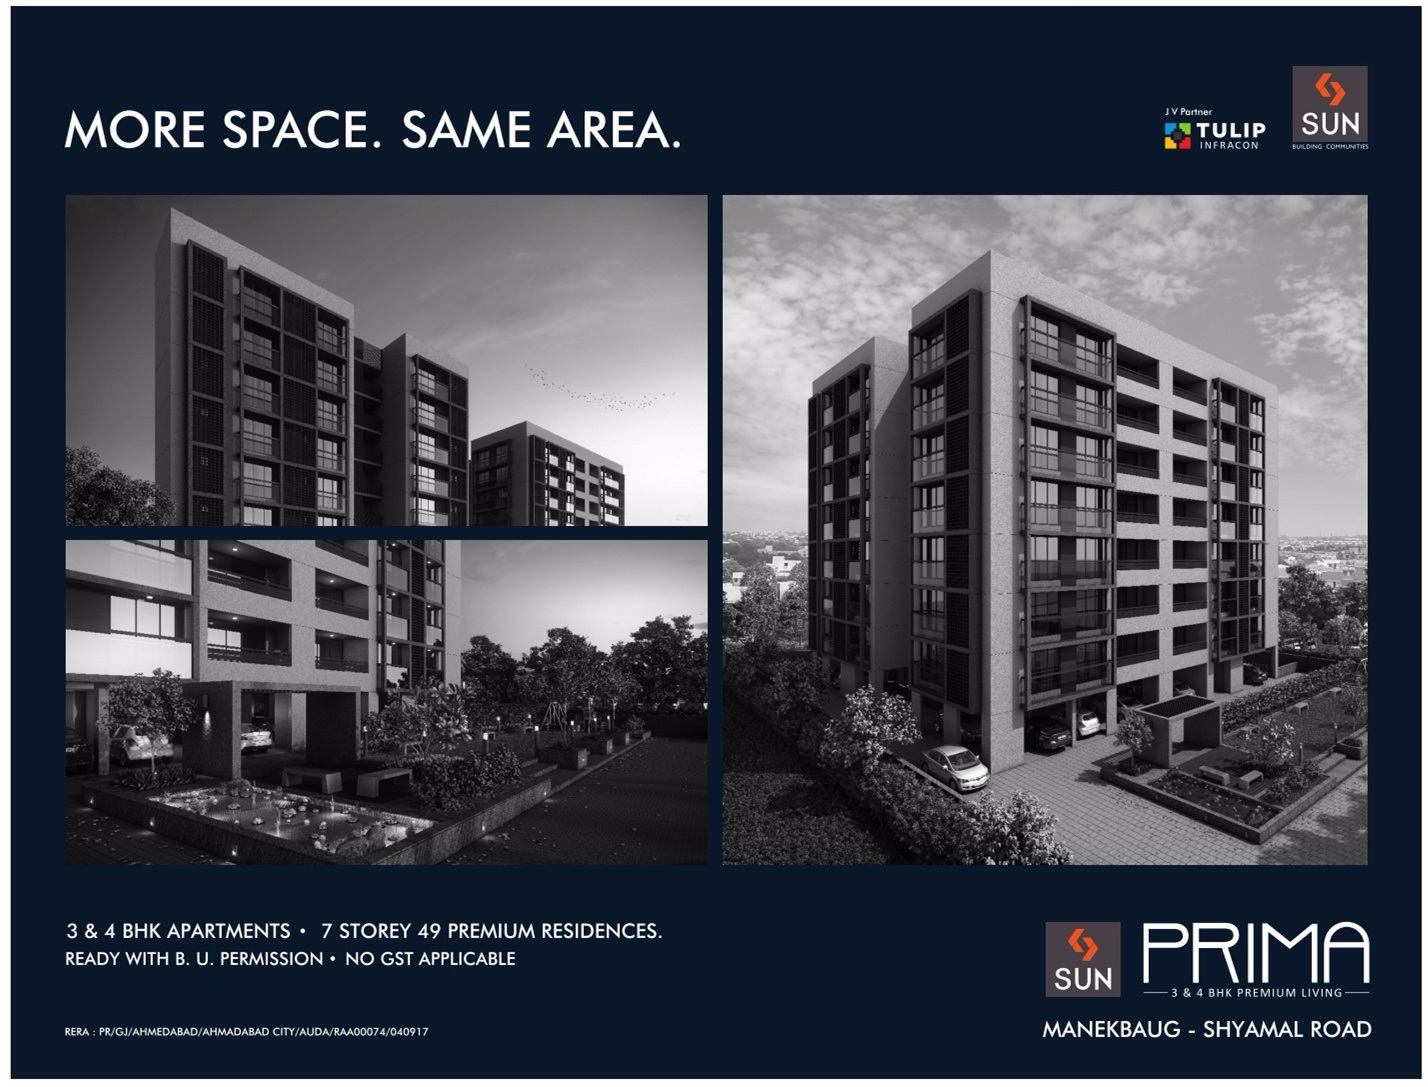 More space within same area at Sun Prima in Ahmedabad Update